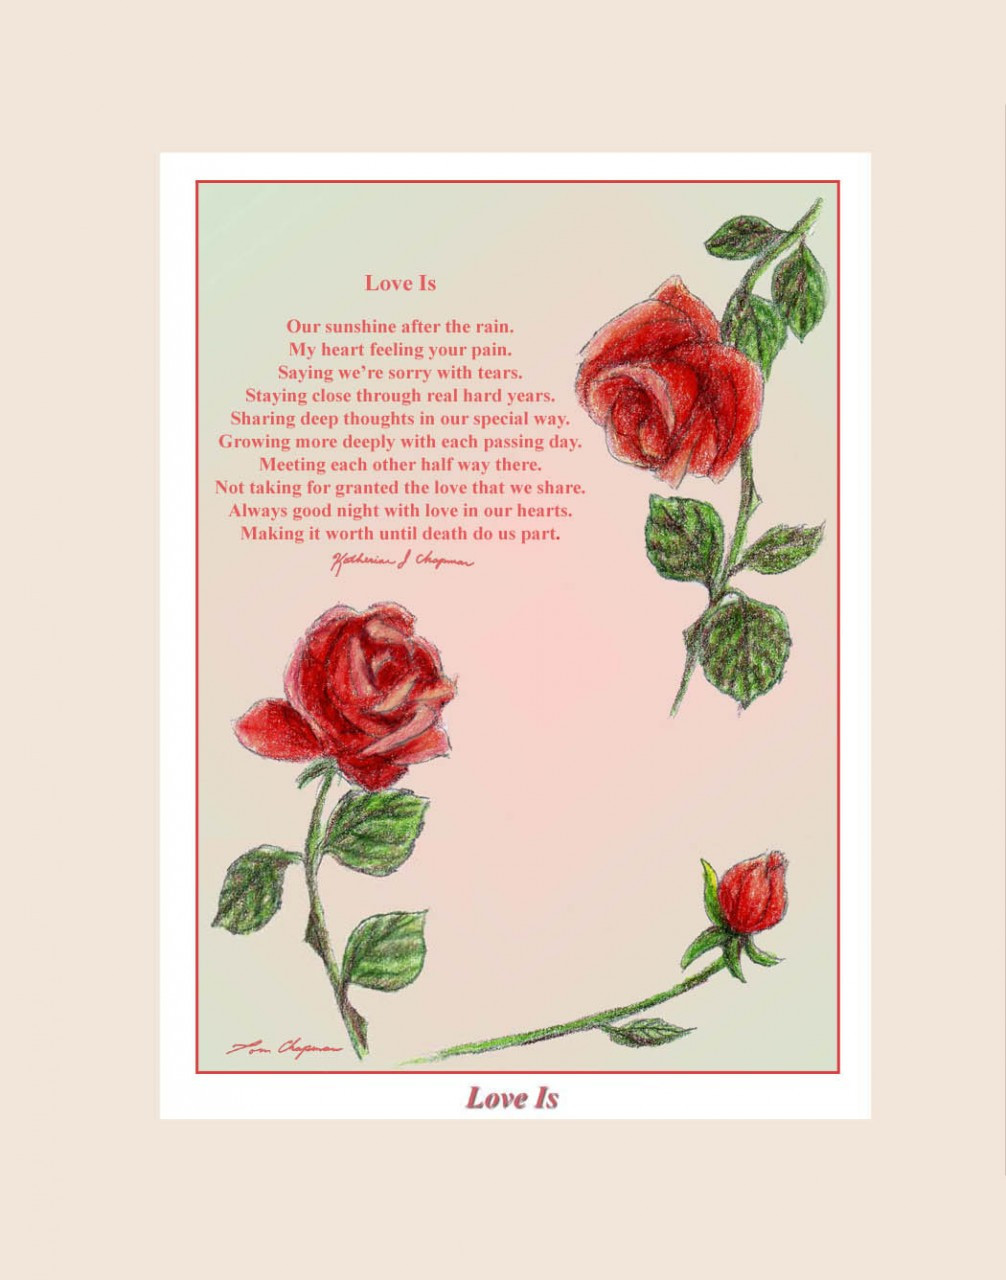 Love Is, inspirational poem print or card by Katherine Chapman